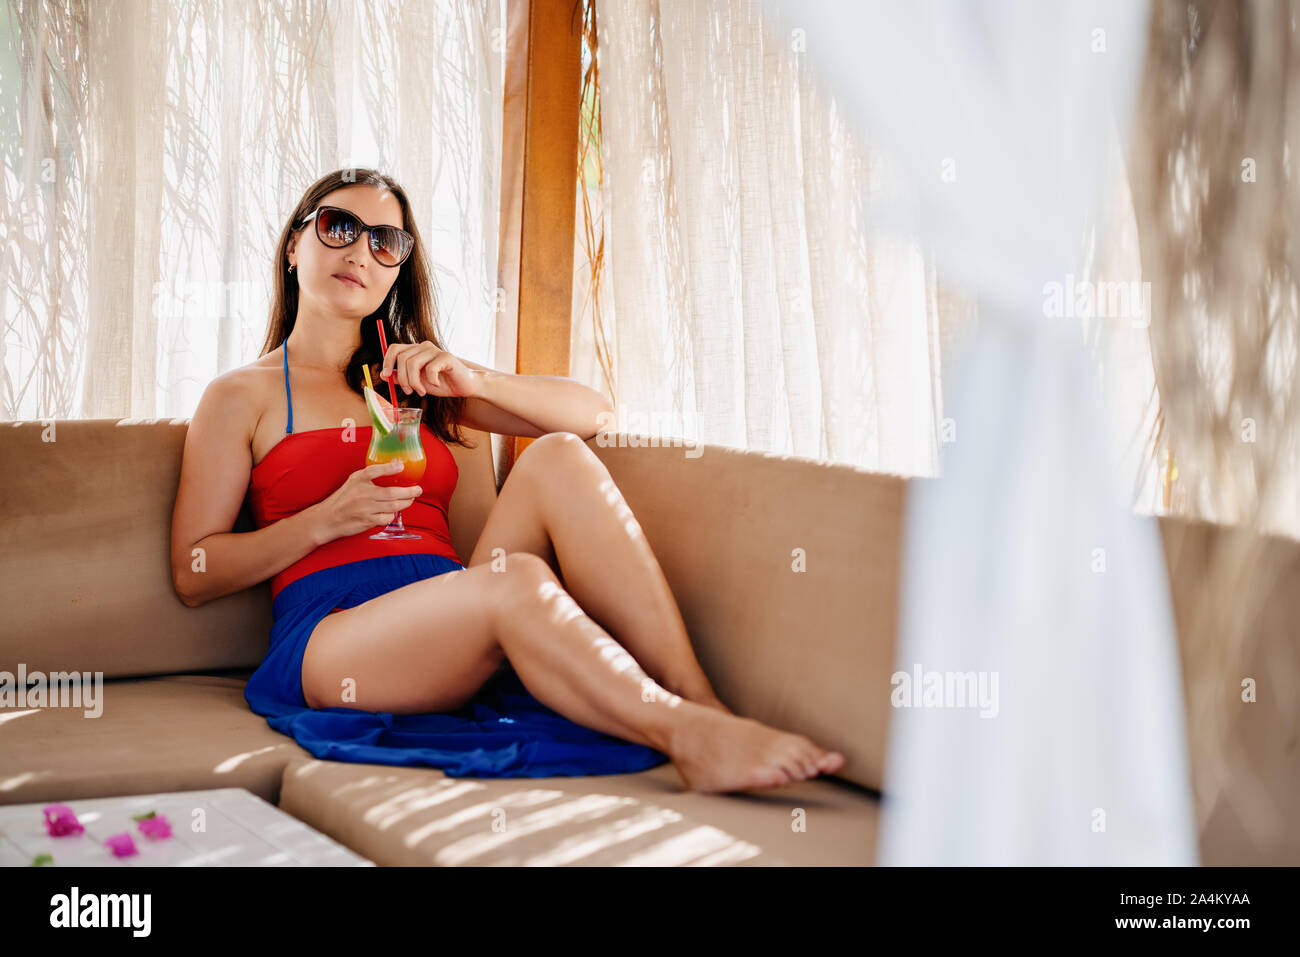 Young woman relaxing and drinking some beverage in a pergola on a vacation. Stock Photo